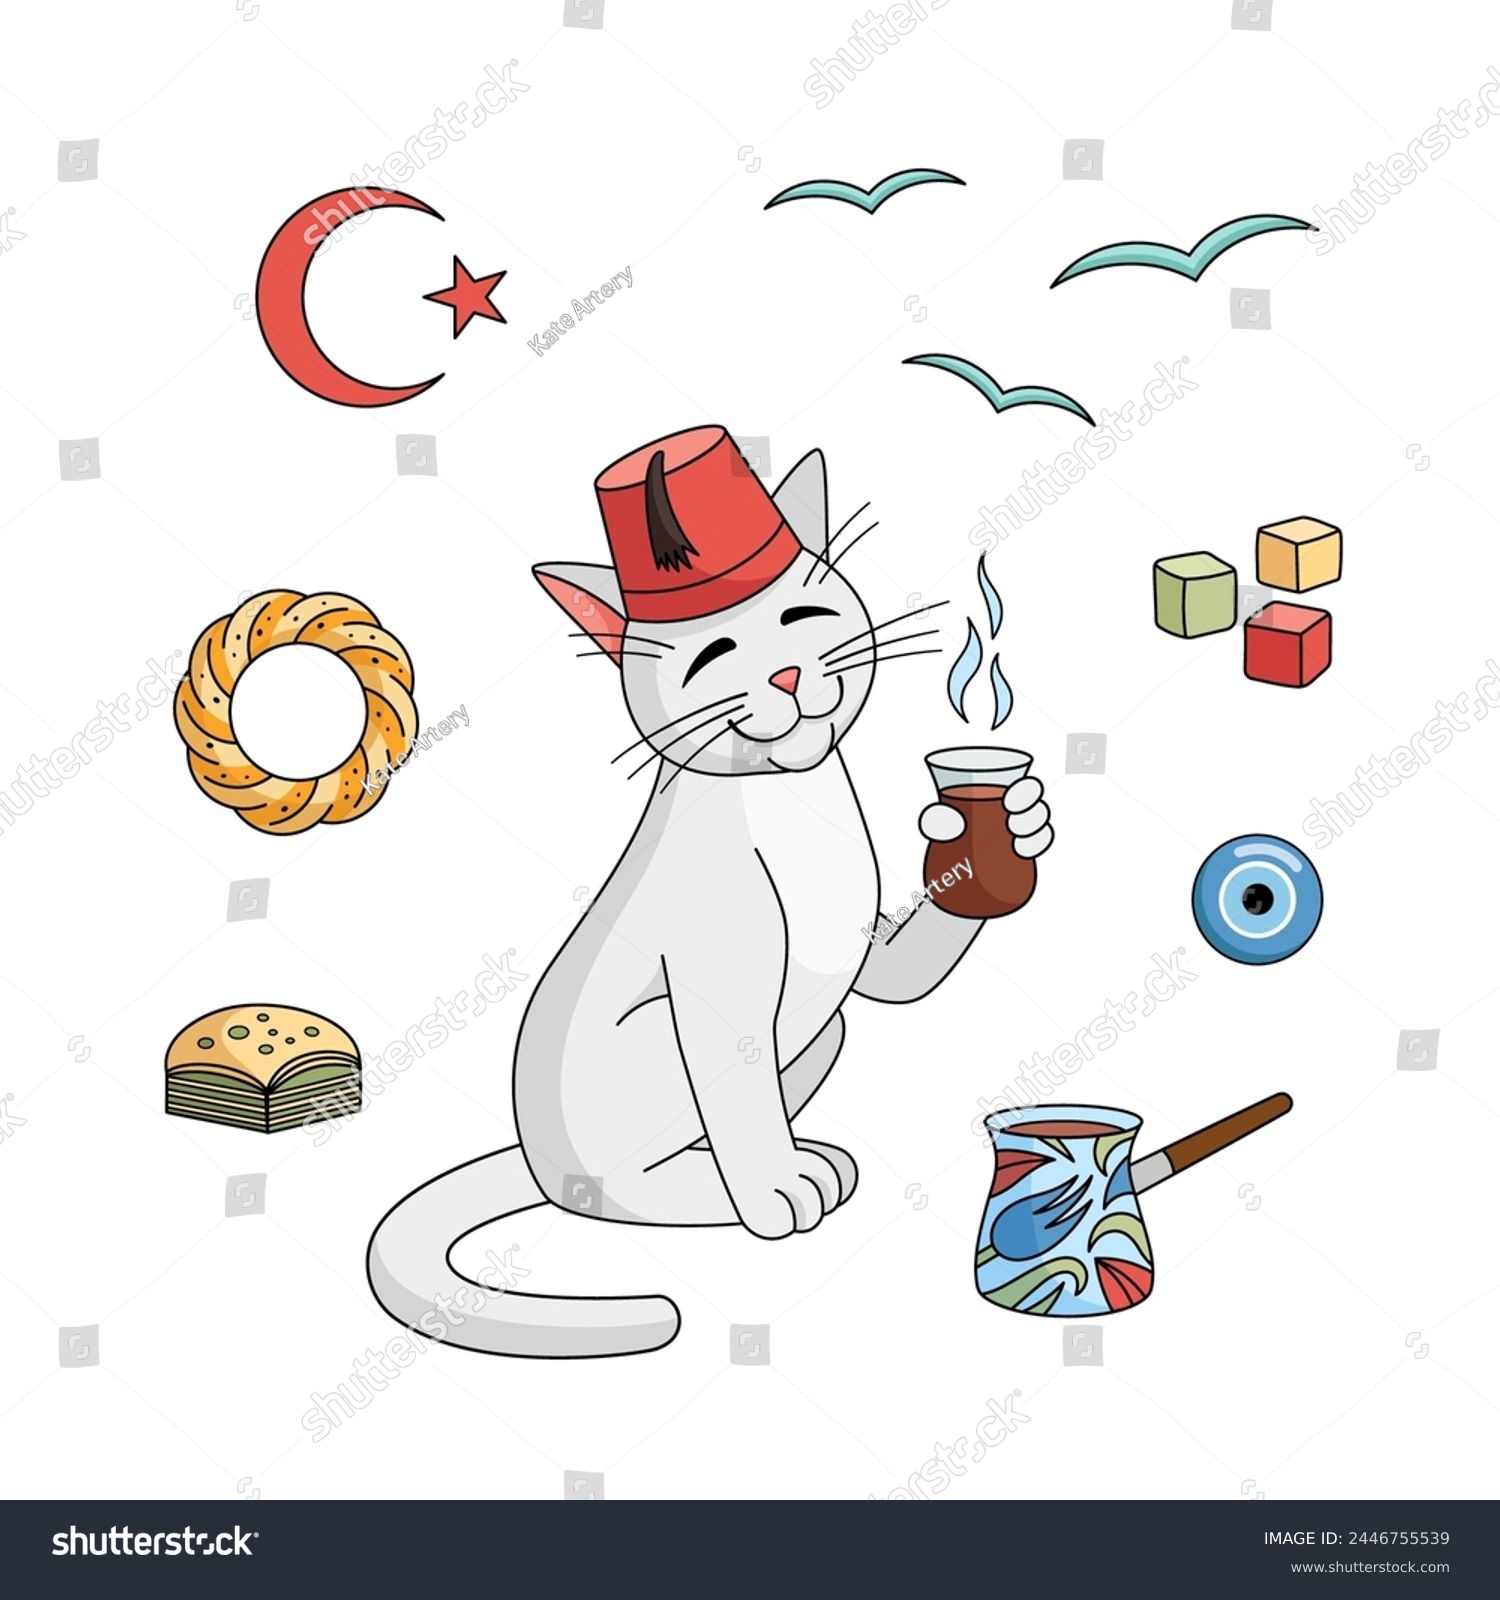 SVG of Turkish attributes set - Cezve, tea cup, baklava, bagel, star and crescent, angora cat, delight, amulet, seagull, fez. Vector collection. Turkish angora cat character with Turkish cup of tea. svg